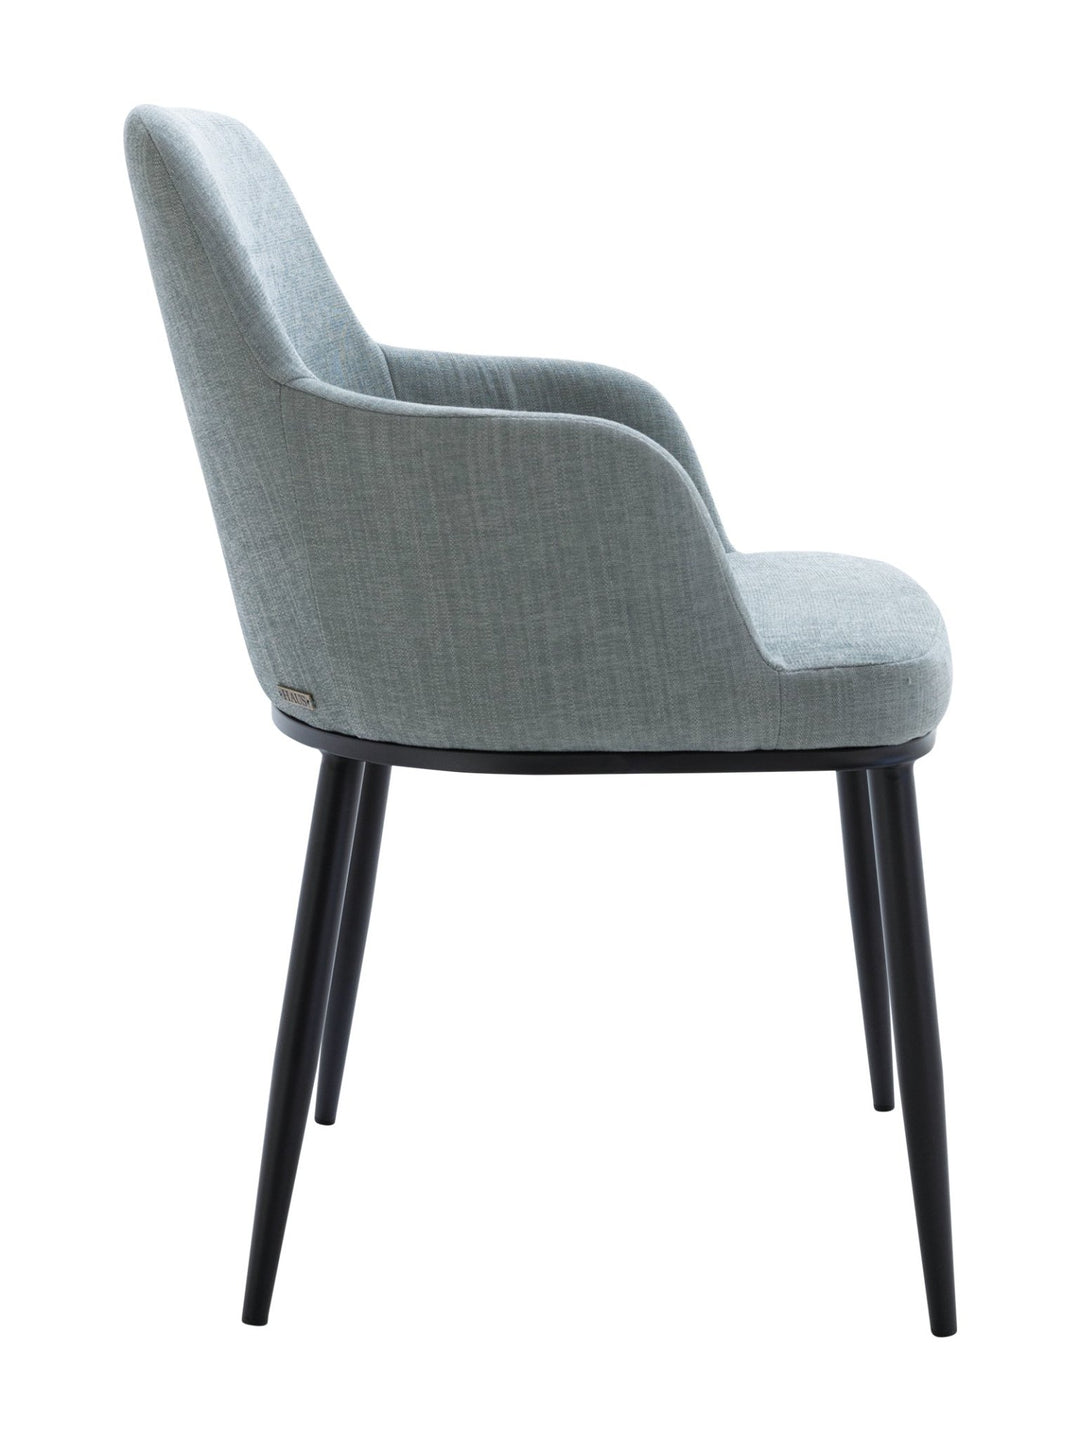 Catherine Dining Chair in Hunter Seaglass - Kitchen & Dining Room Chairs - Hertex Haus - badge_fabric